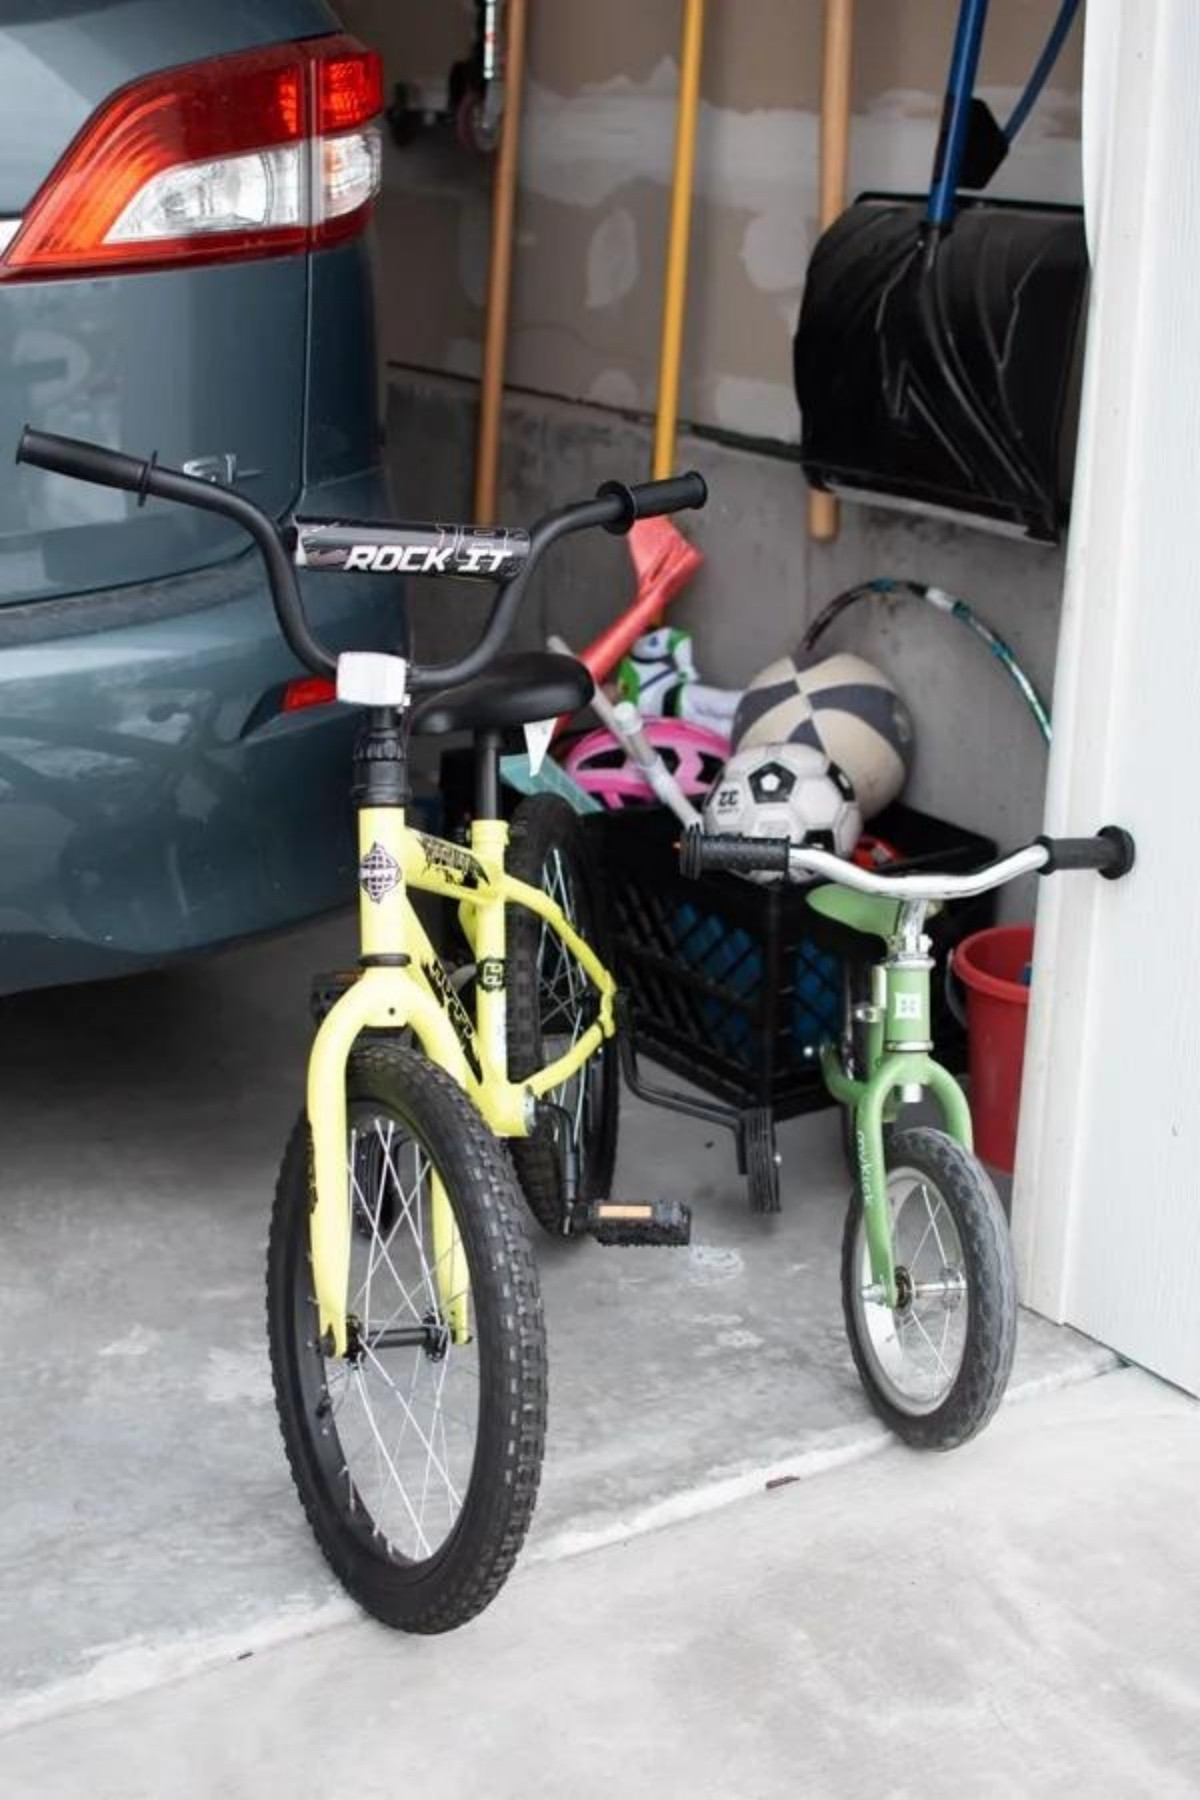 Yellow and green kids bikes parked inside garage in front of blue van.